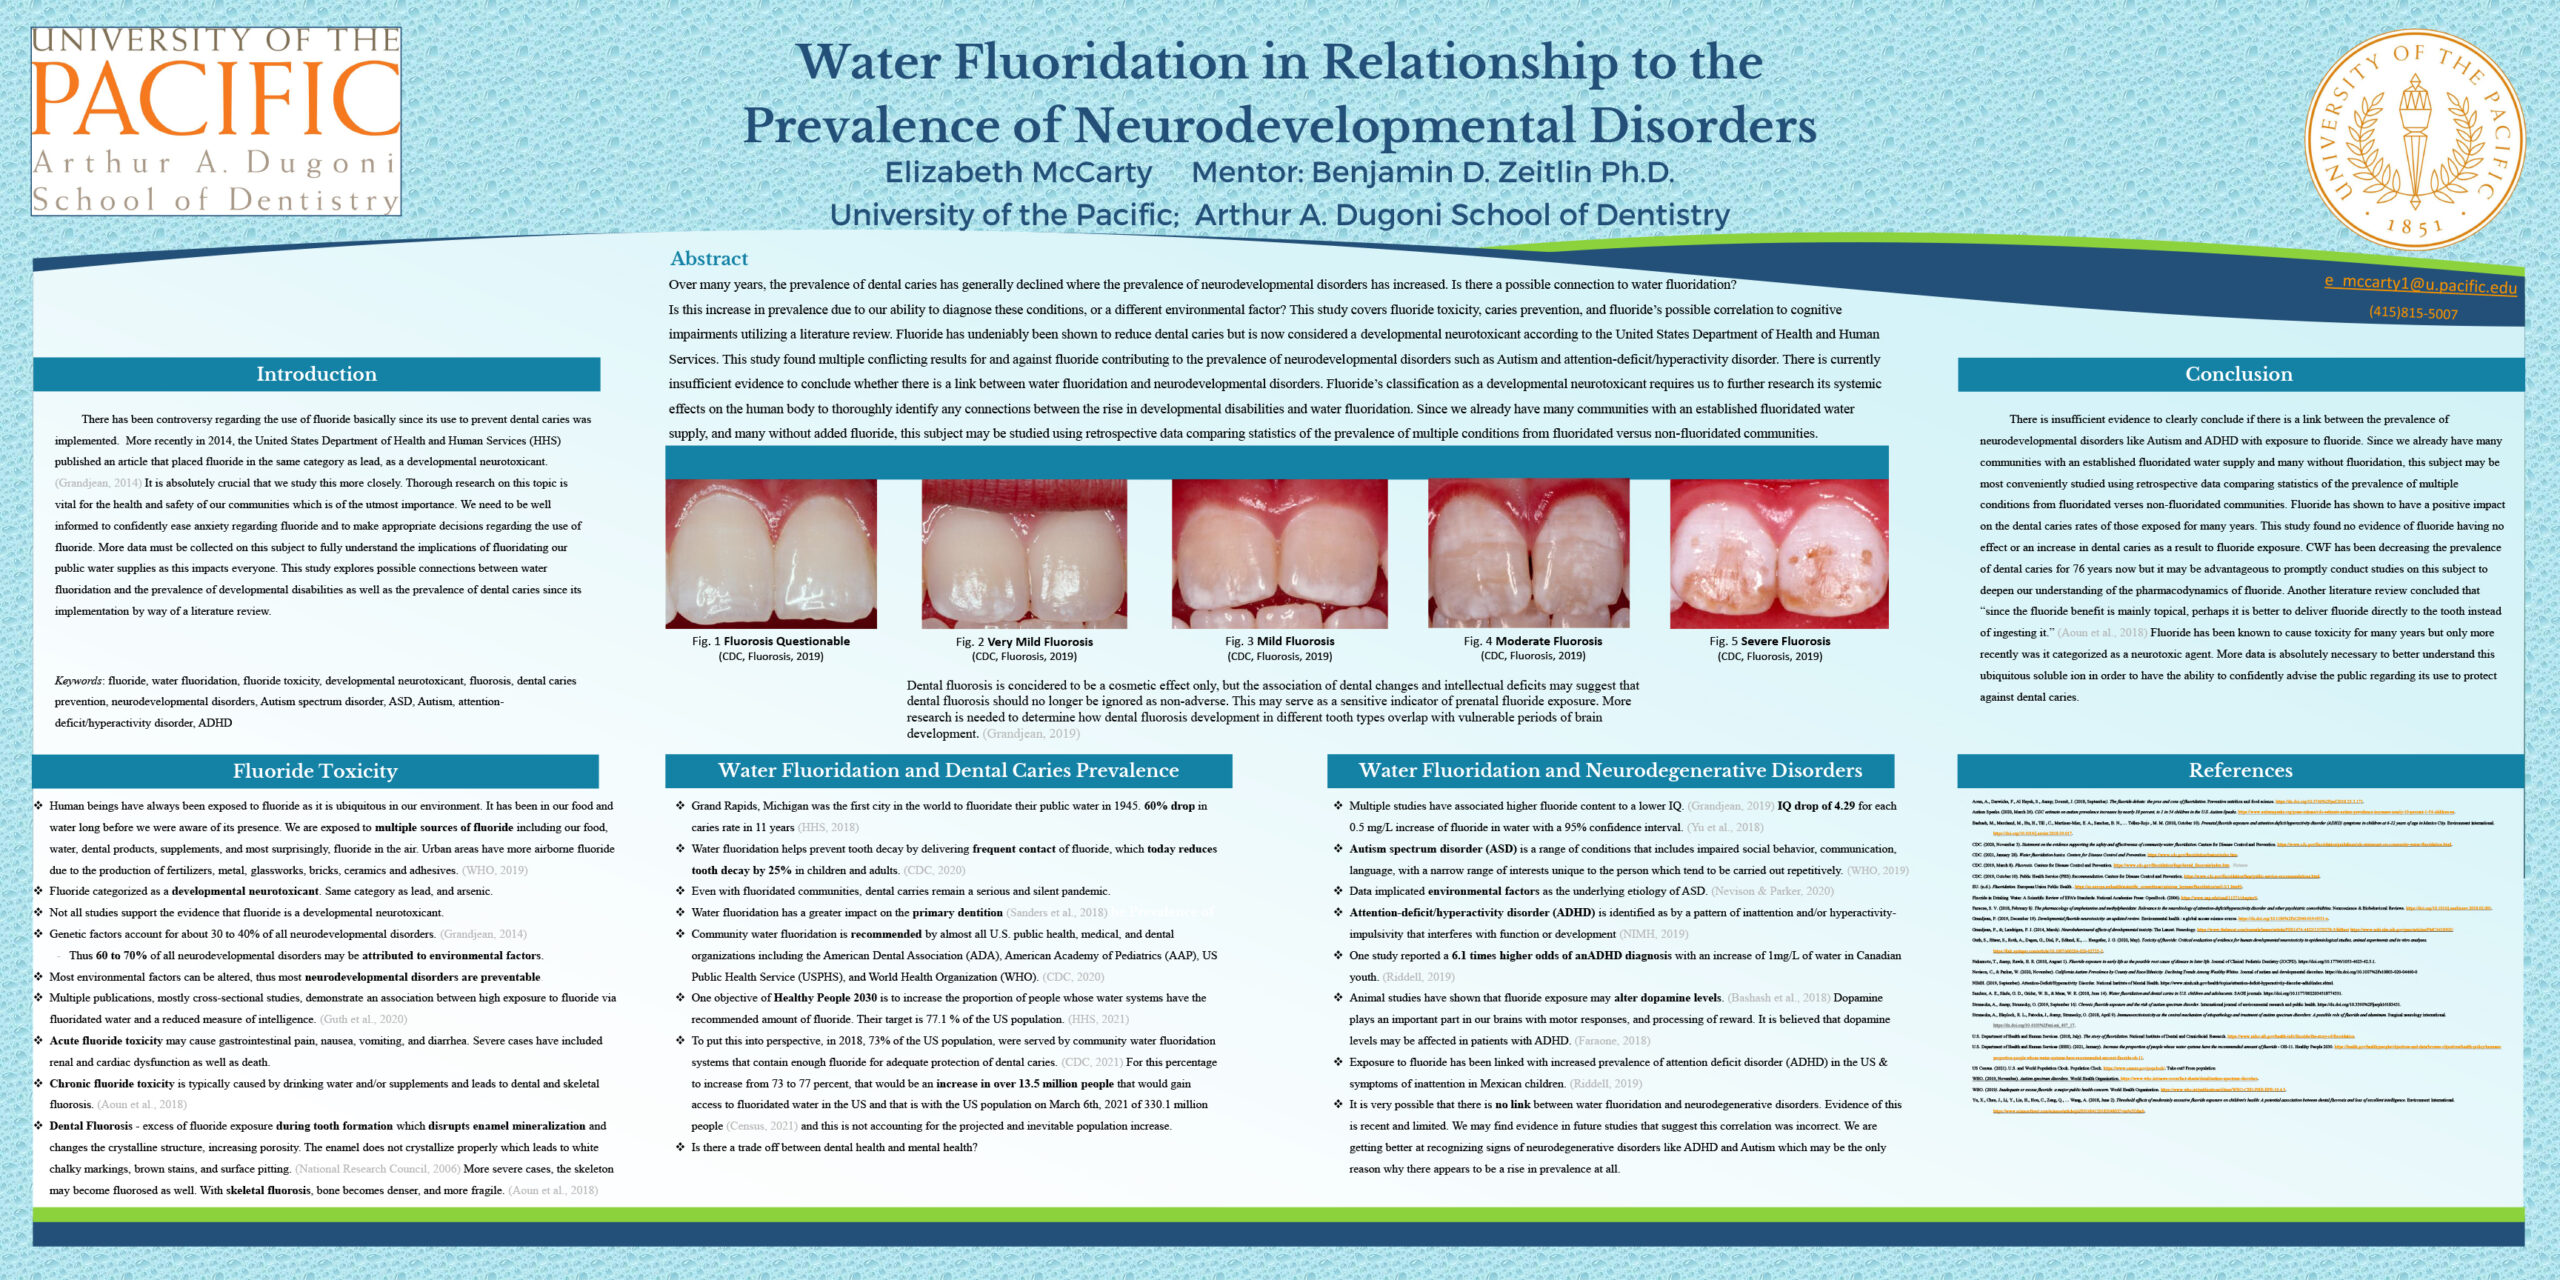 Water Fluoridation in Relationship to the Prevalence of Neurodevelopmental Disorders